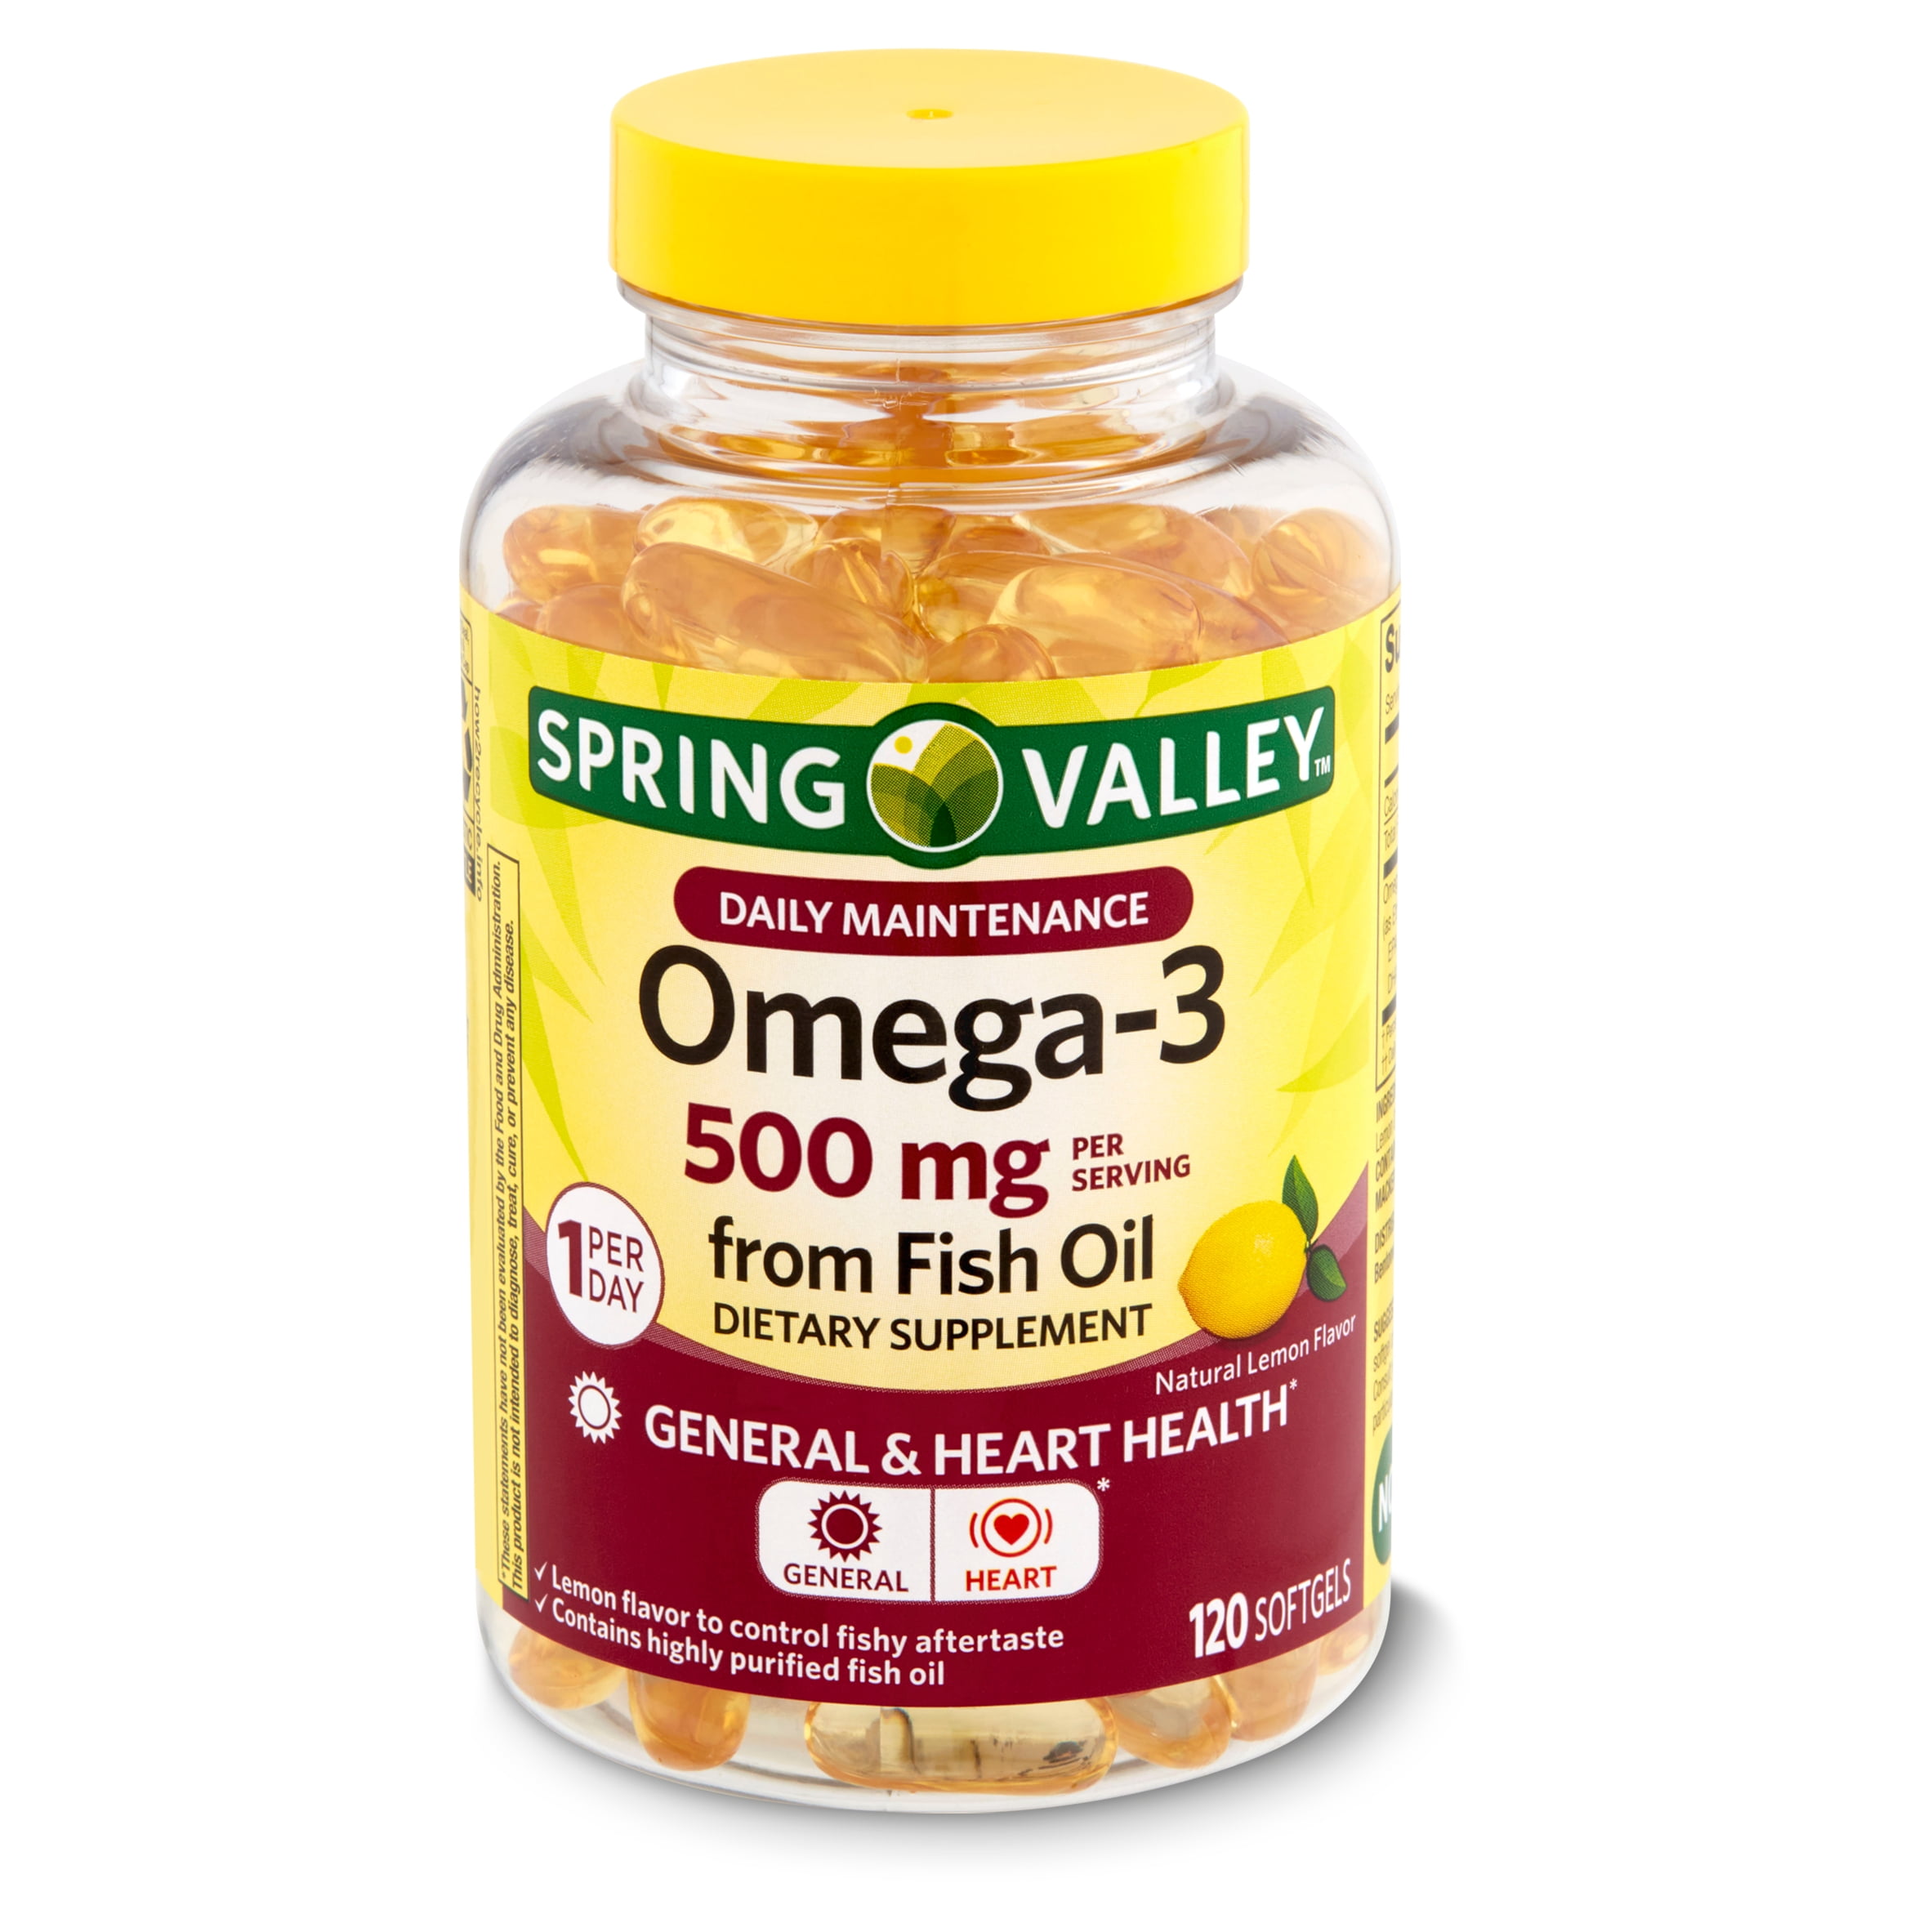 Spring Valley Natural Lemon Flavor Omega-3 Fish Oil Dietary Supplement, 500 mg, 120 count